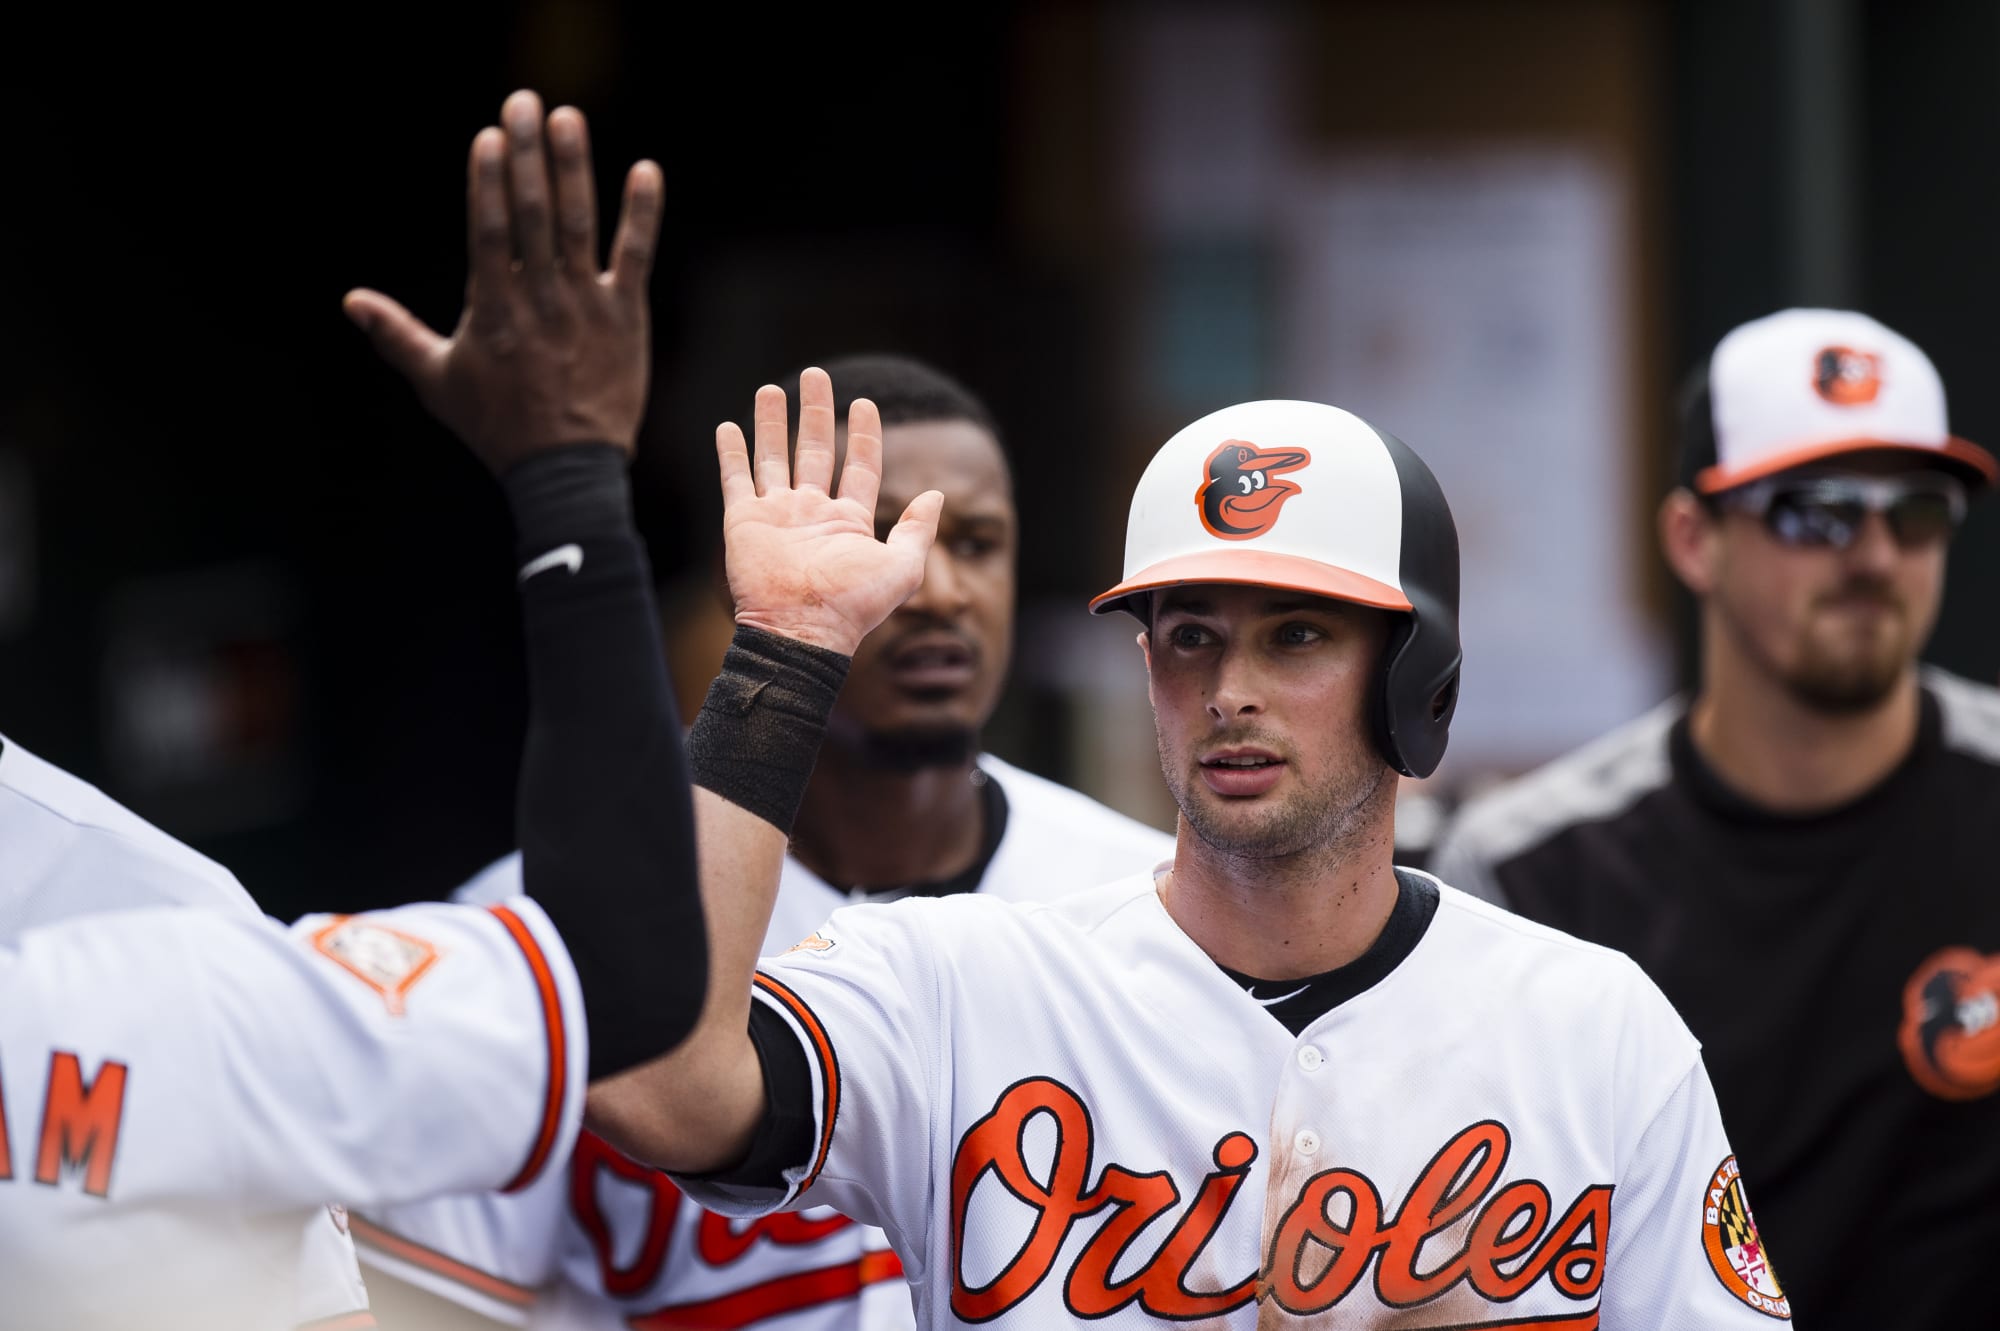 The Baltimore Orioles Roster Makeup Will Reveal Team's Priorities